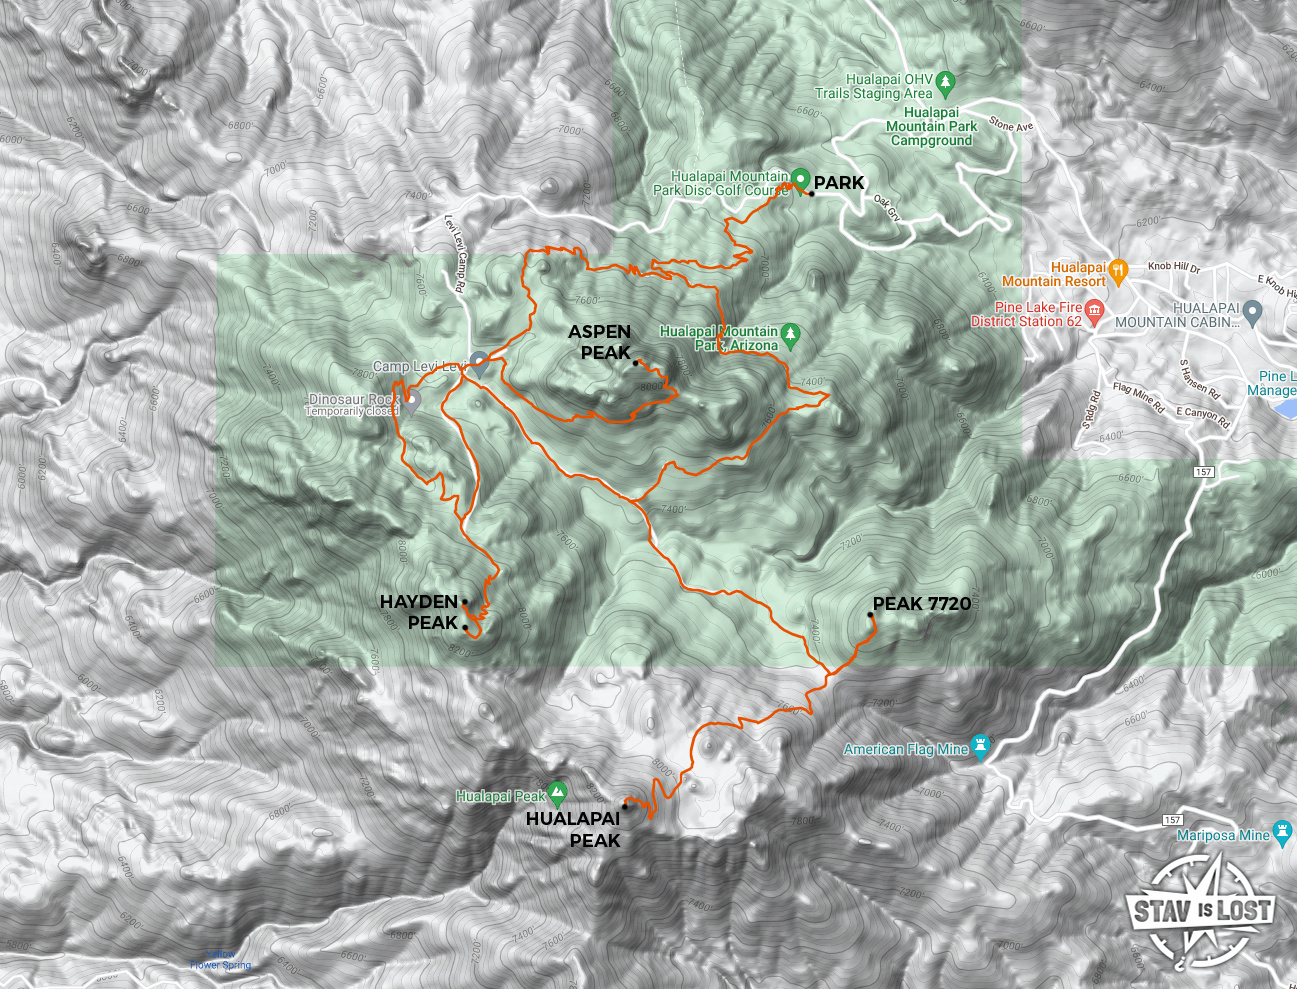 map for Hualapai Mountains Loop by stav is lost